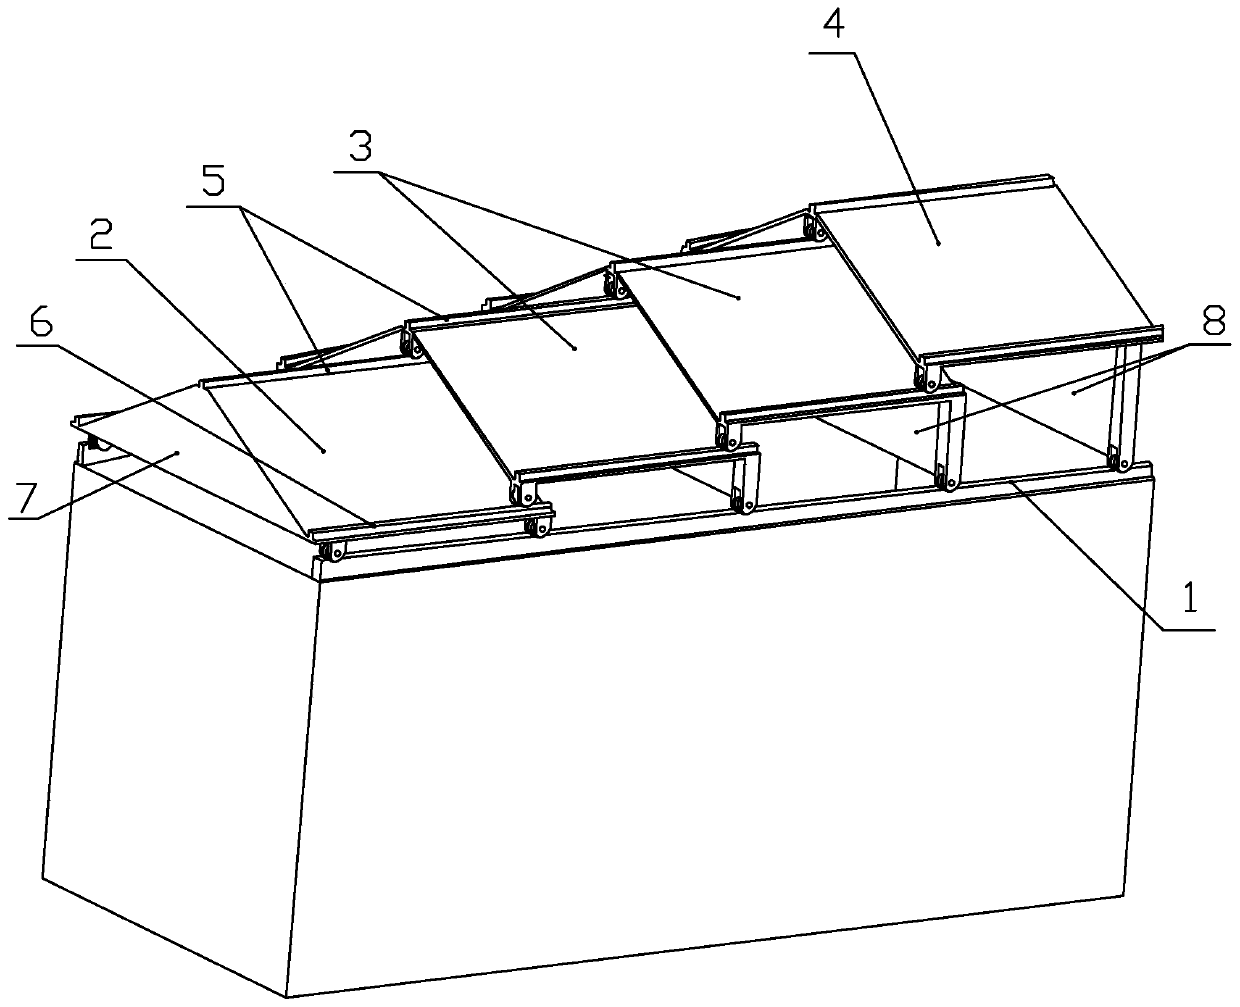 Multi-layer staggered-movement nested openable roof